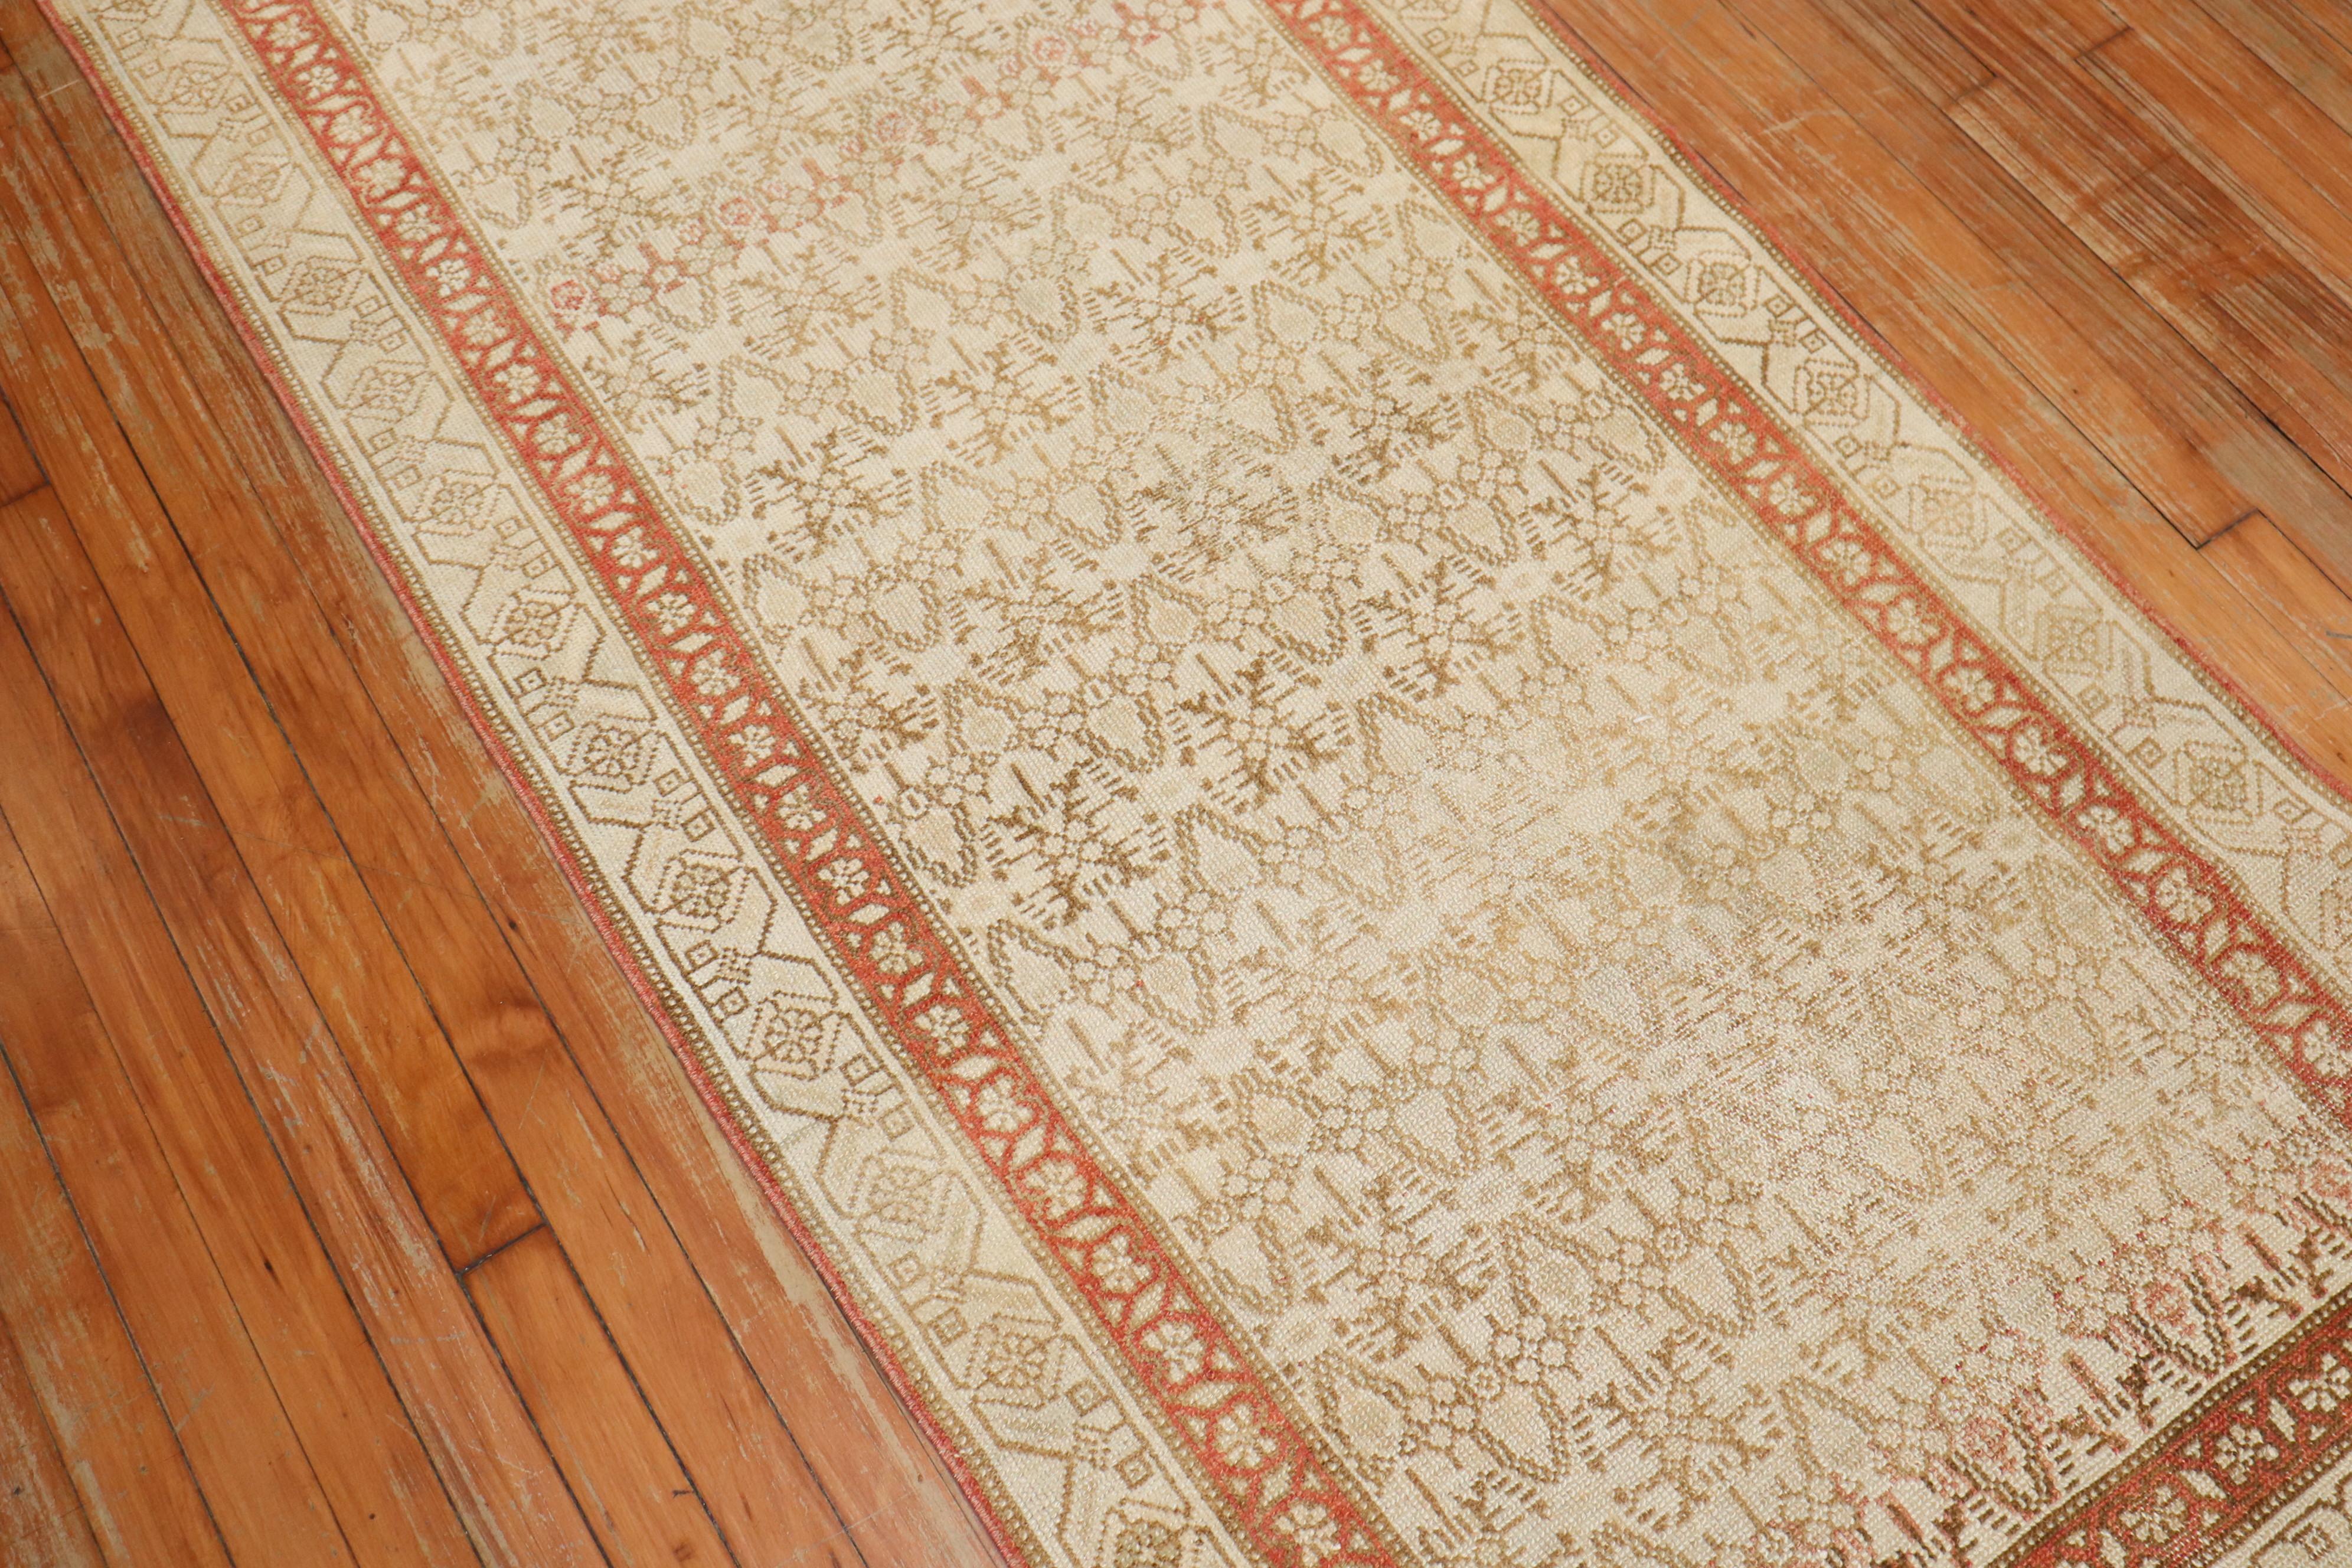 Neutral Color Persian Tribal Serab Runner from the 2nd quarter of the 20th Century

Measures: 3' x 10'1'.